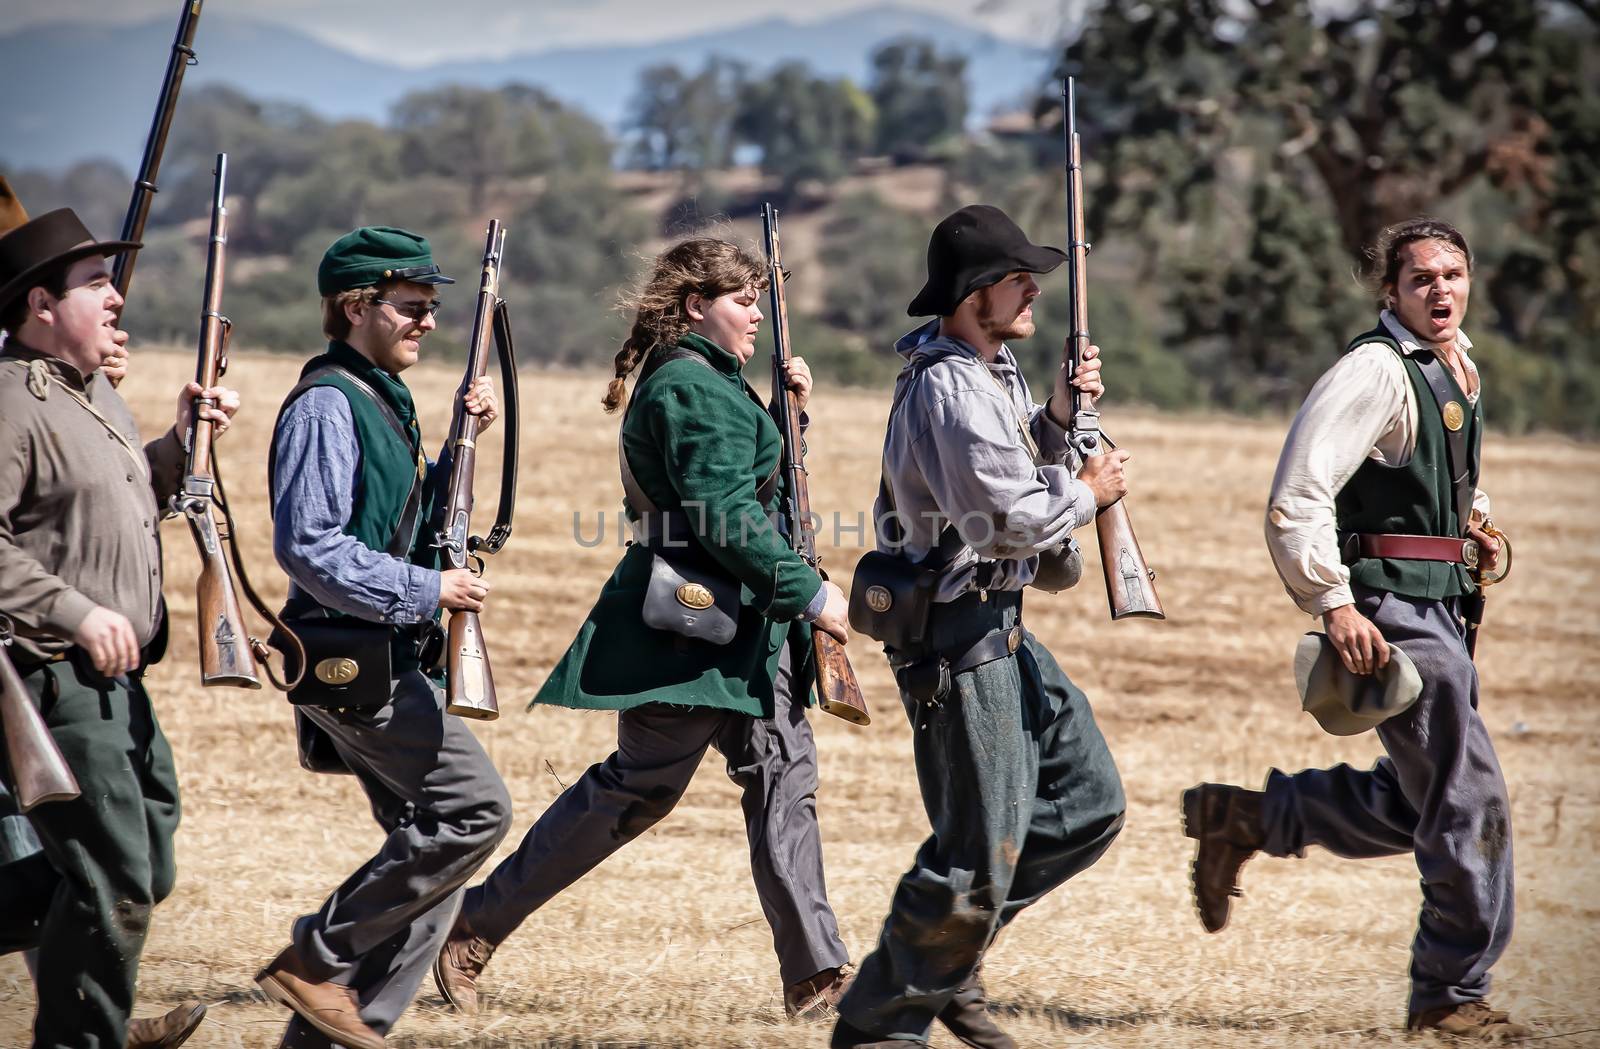 Rebel soldiers run to stand ready for combat during a Civil War Reenactment at Anderson, California.
Photo taken on: September 27th, 2014